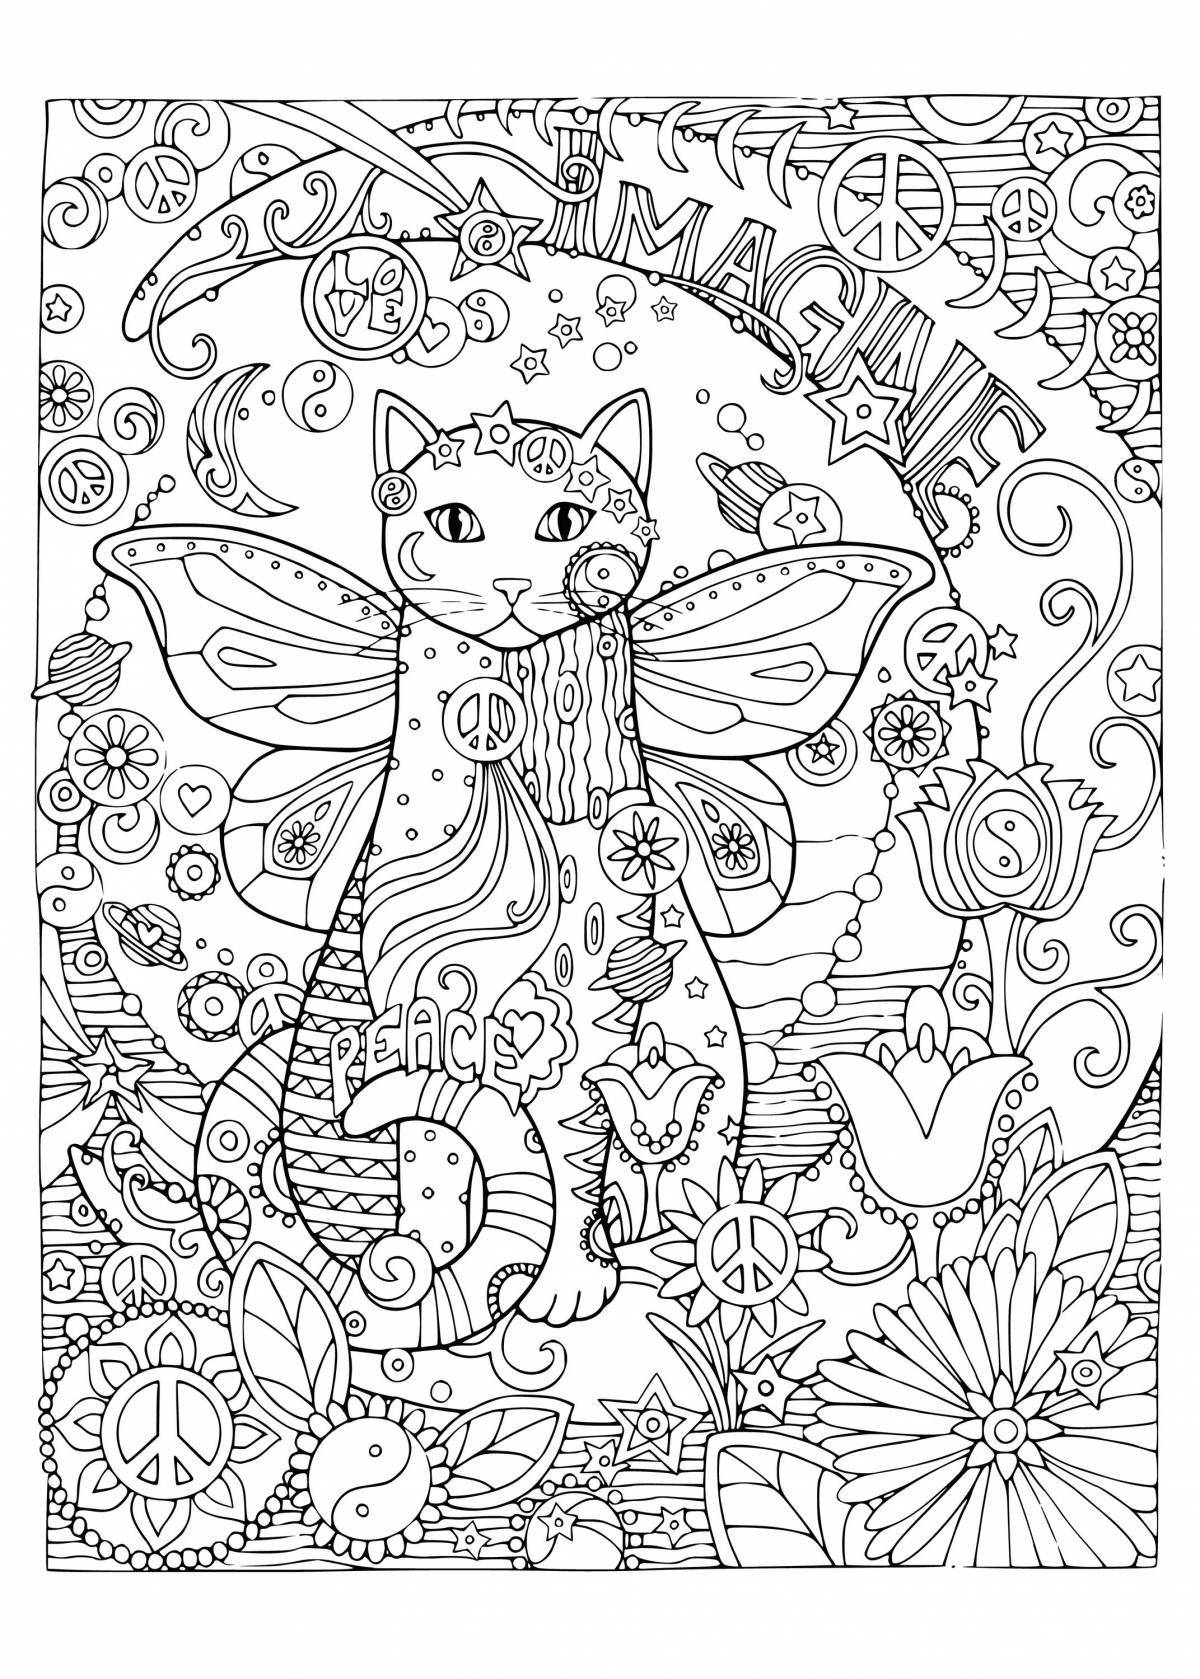 Delightful coloring book for girls 12 years old - cats